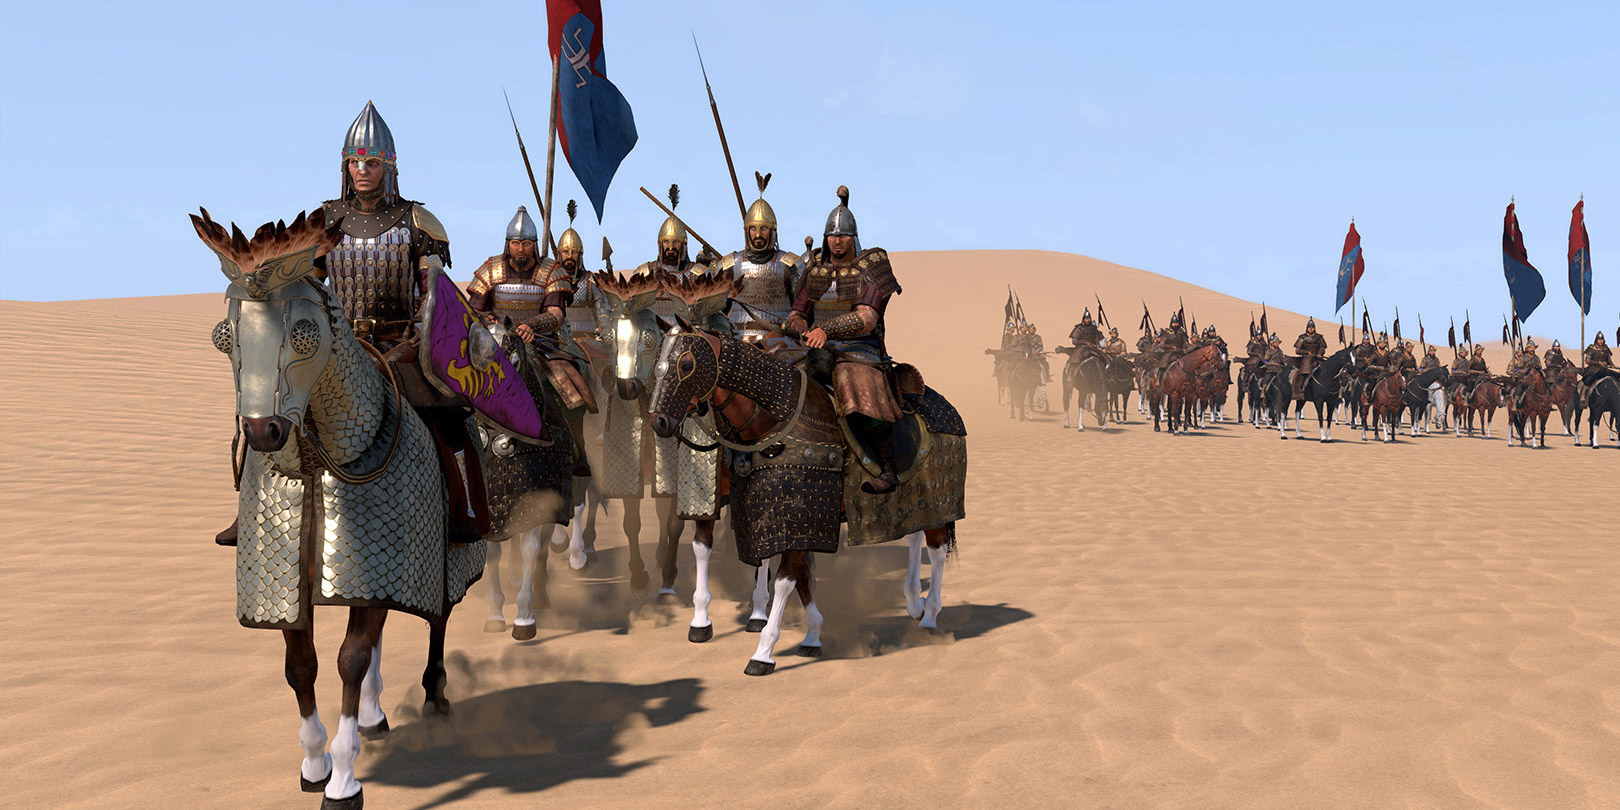 Mount and blade bannerlord караваны. Mount and Blade 2 Bannerlord. Варбанд баннерлорд. Mount Blade 2 Bannerlord королевство Свадия. БАТТАНИЯ В Mount and Blade 2.